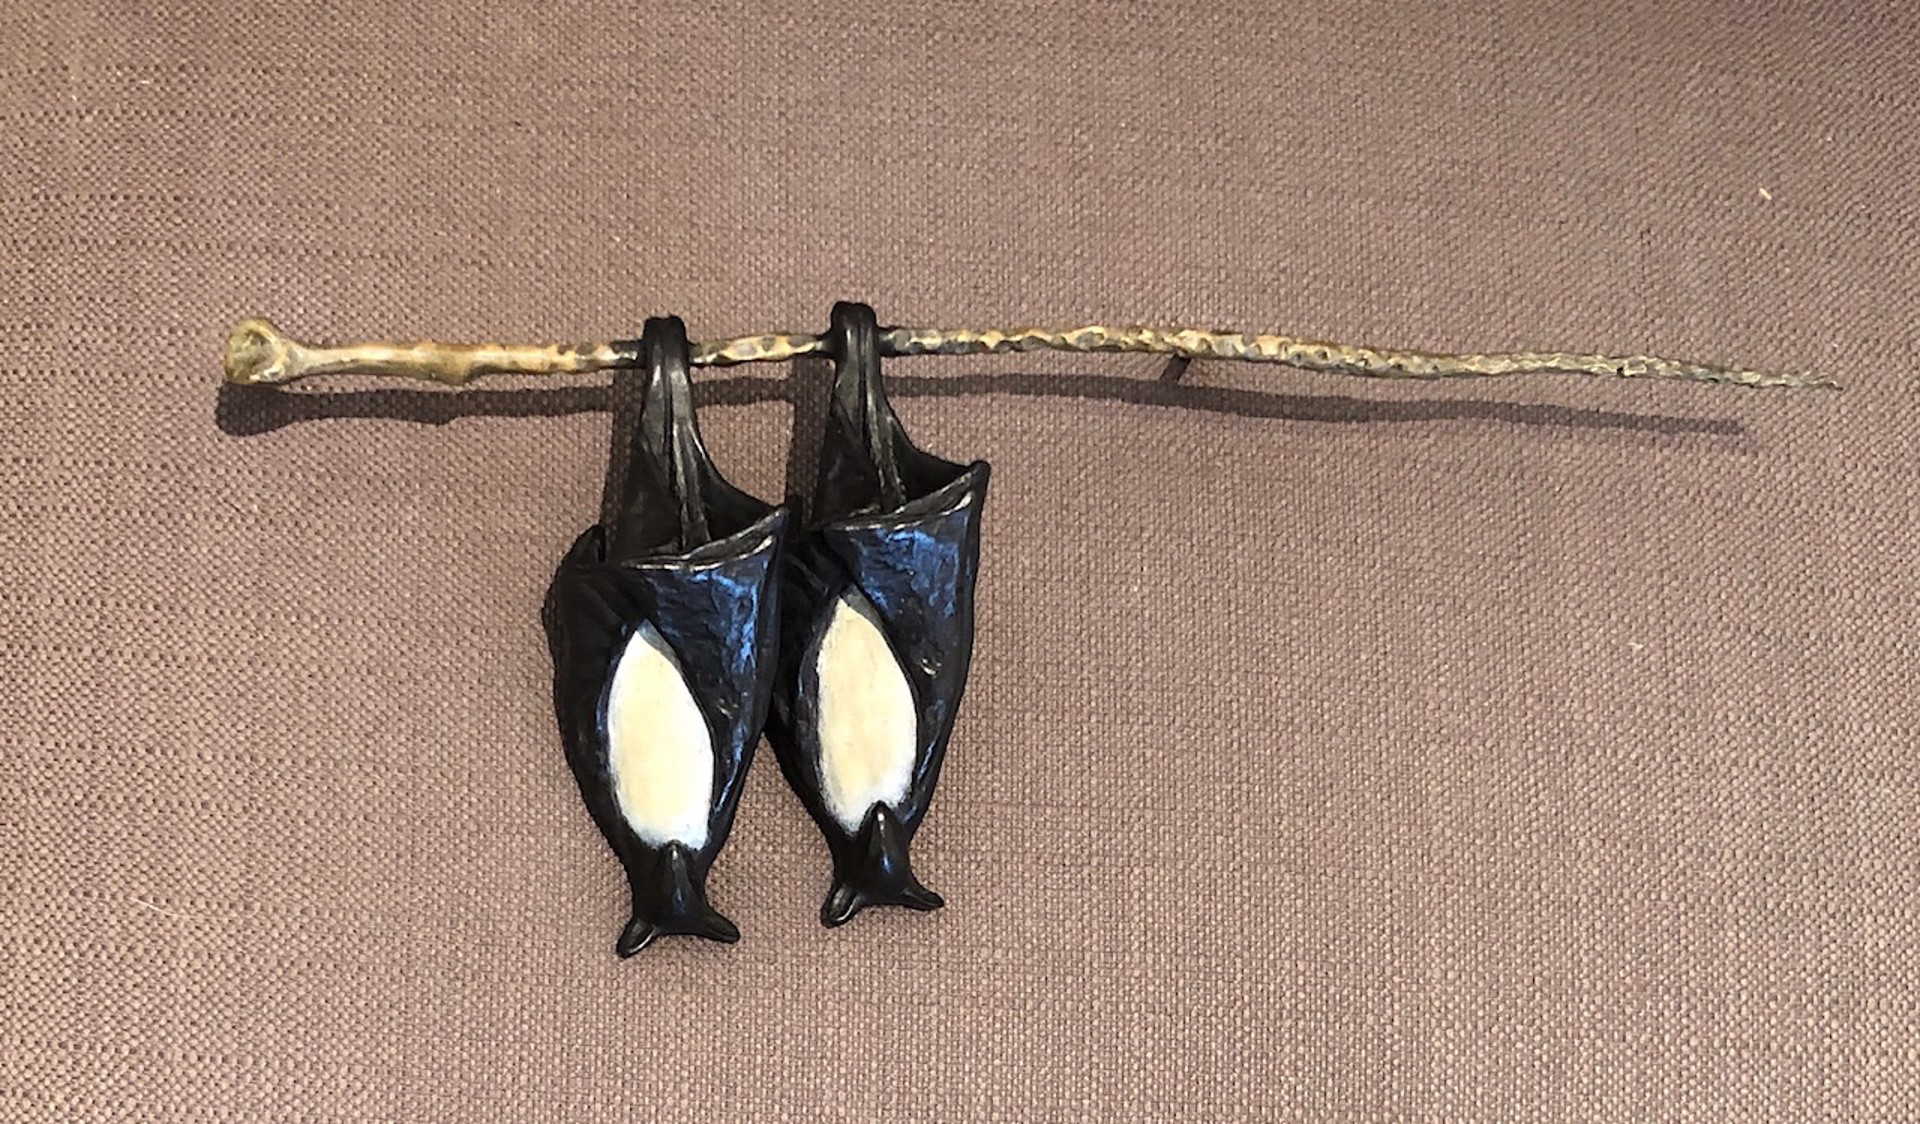 2 Temple Bats on a Branch, hangs on the left side by Copper Tritscheller